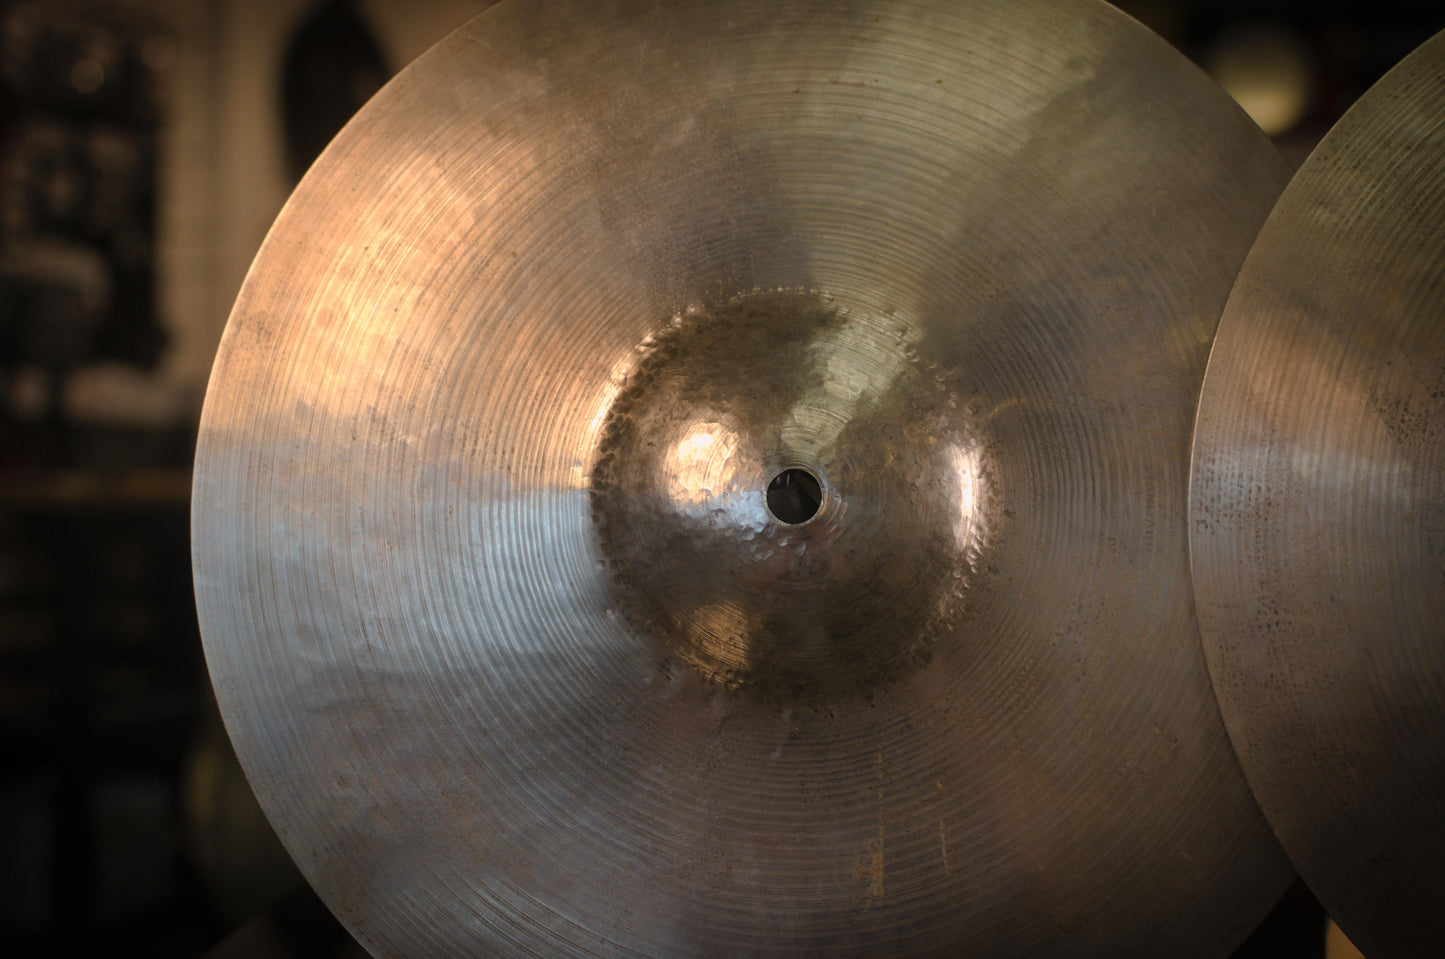 Ludwig Standard Re-Hammered 13" Hi-hat Cymbals - Made by Paiste